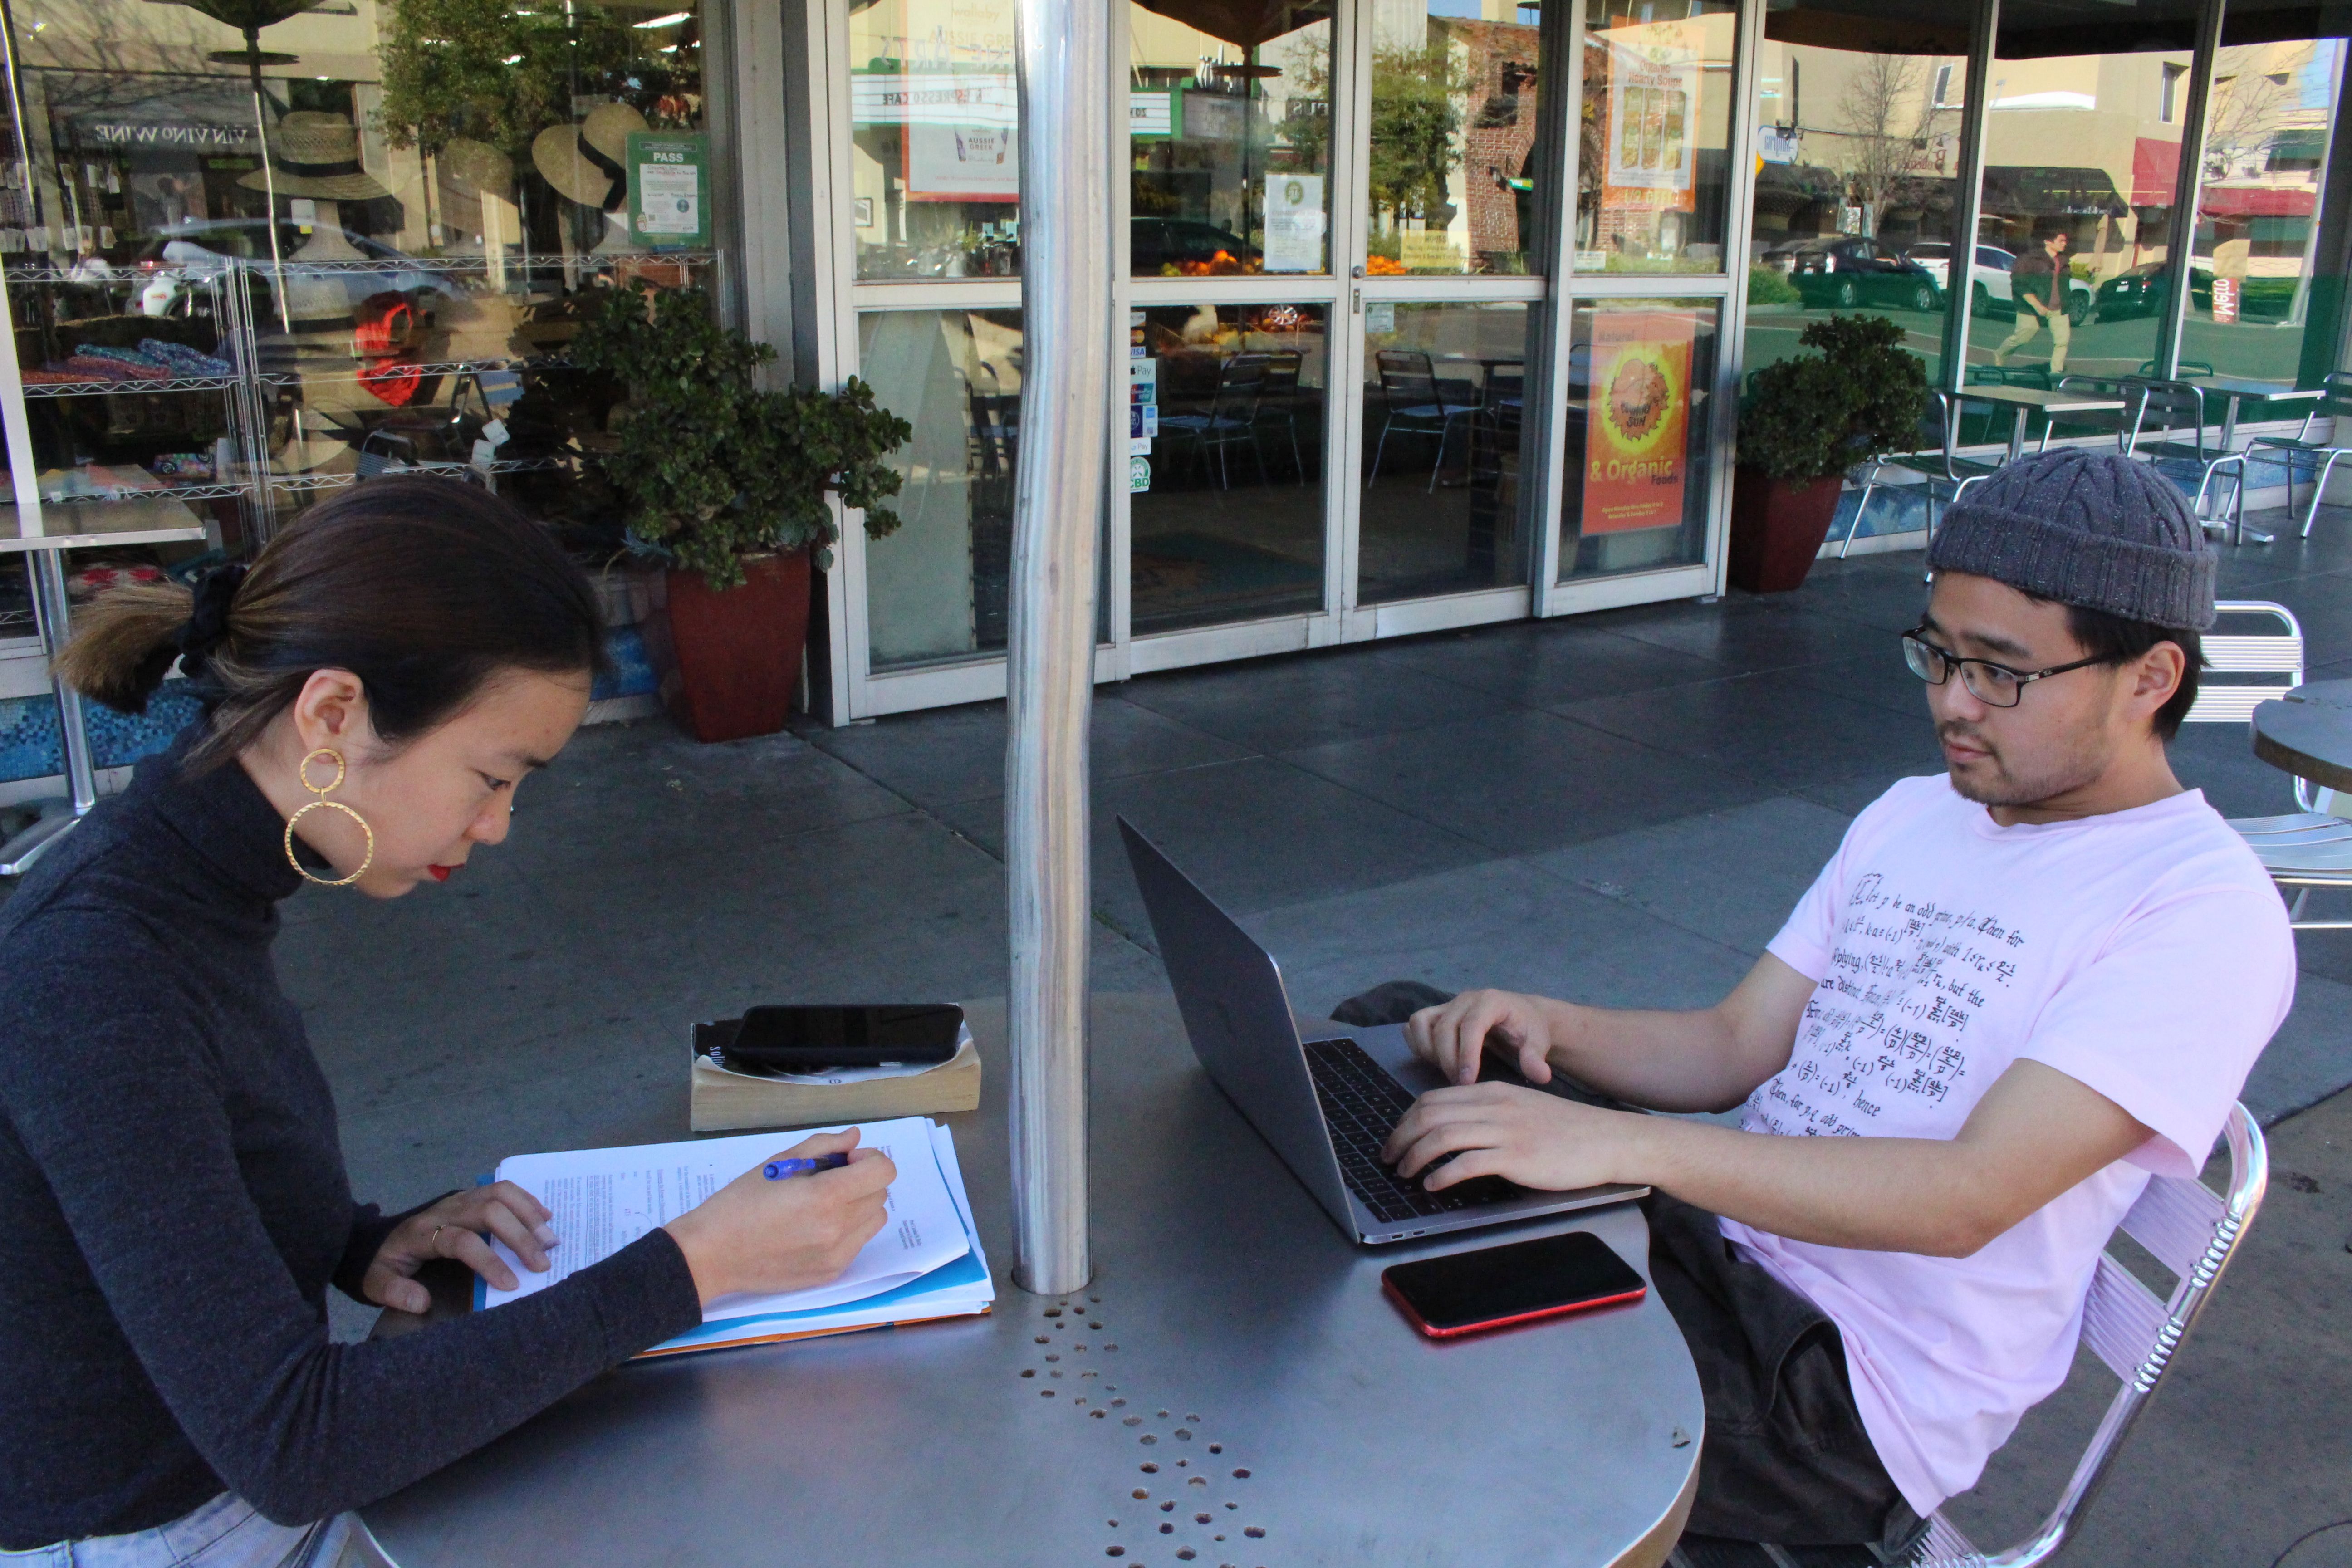 International students Yaqing "Victoria" Yang and Ende Shen of China study together at a sidewalk table in the Silicon Valley city of Palo Alto on March 12, 2020 to break from the on-campus isolation at nearby Stanford University where classroom lectures have been replaced with virtual sessions due to the risk of novel coronavirus. - Tech-savvy Silicon Valley is joining the trend of remote work and classes as people seek to contain the fast-growing disease, relying on many of the technologies invented or refined in the area. (Photo by Glenn CHAPMAN / AFP) (Photo by GLENN CHAPMAN/AFP via Getty Images)